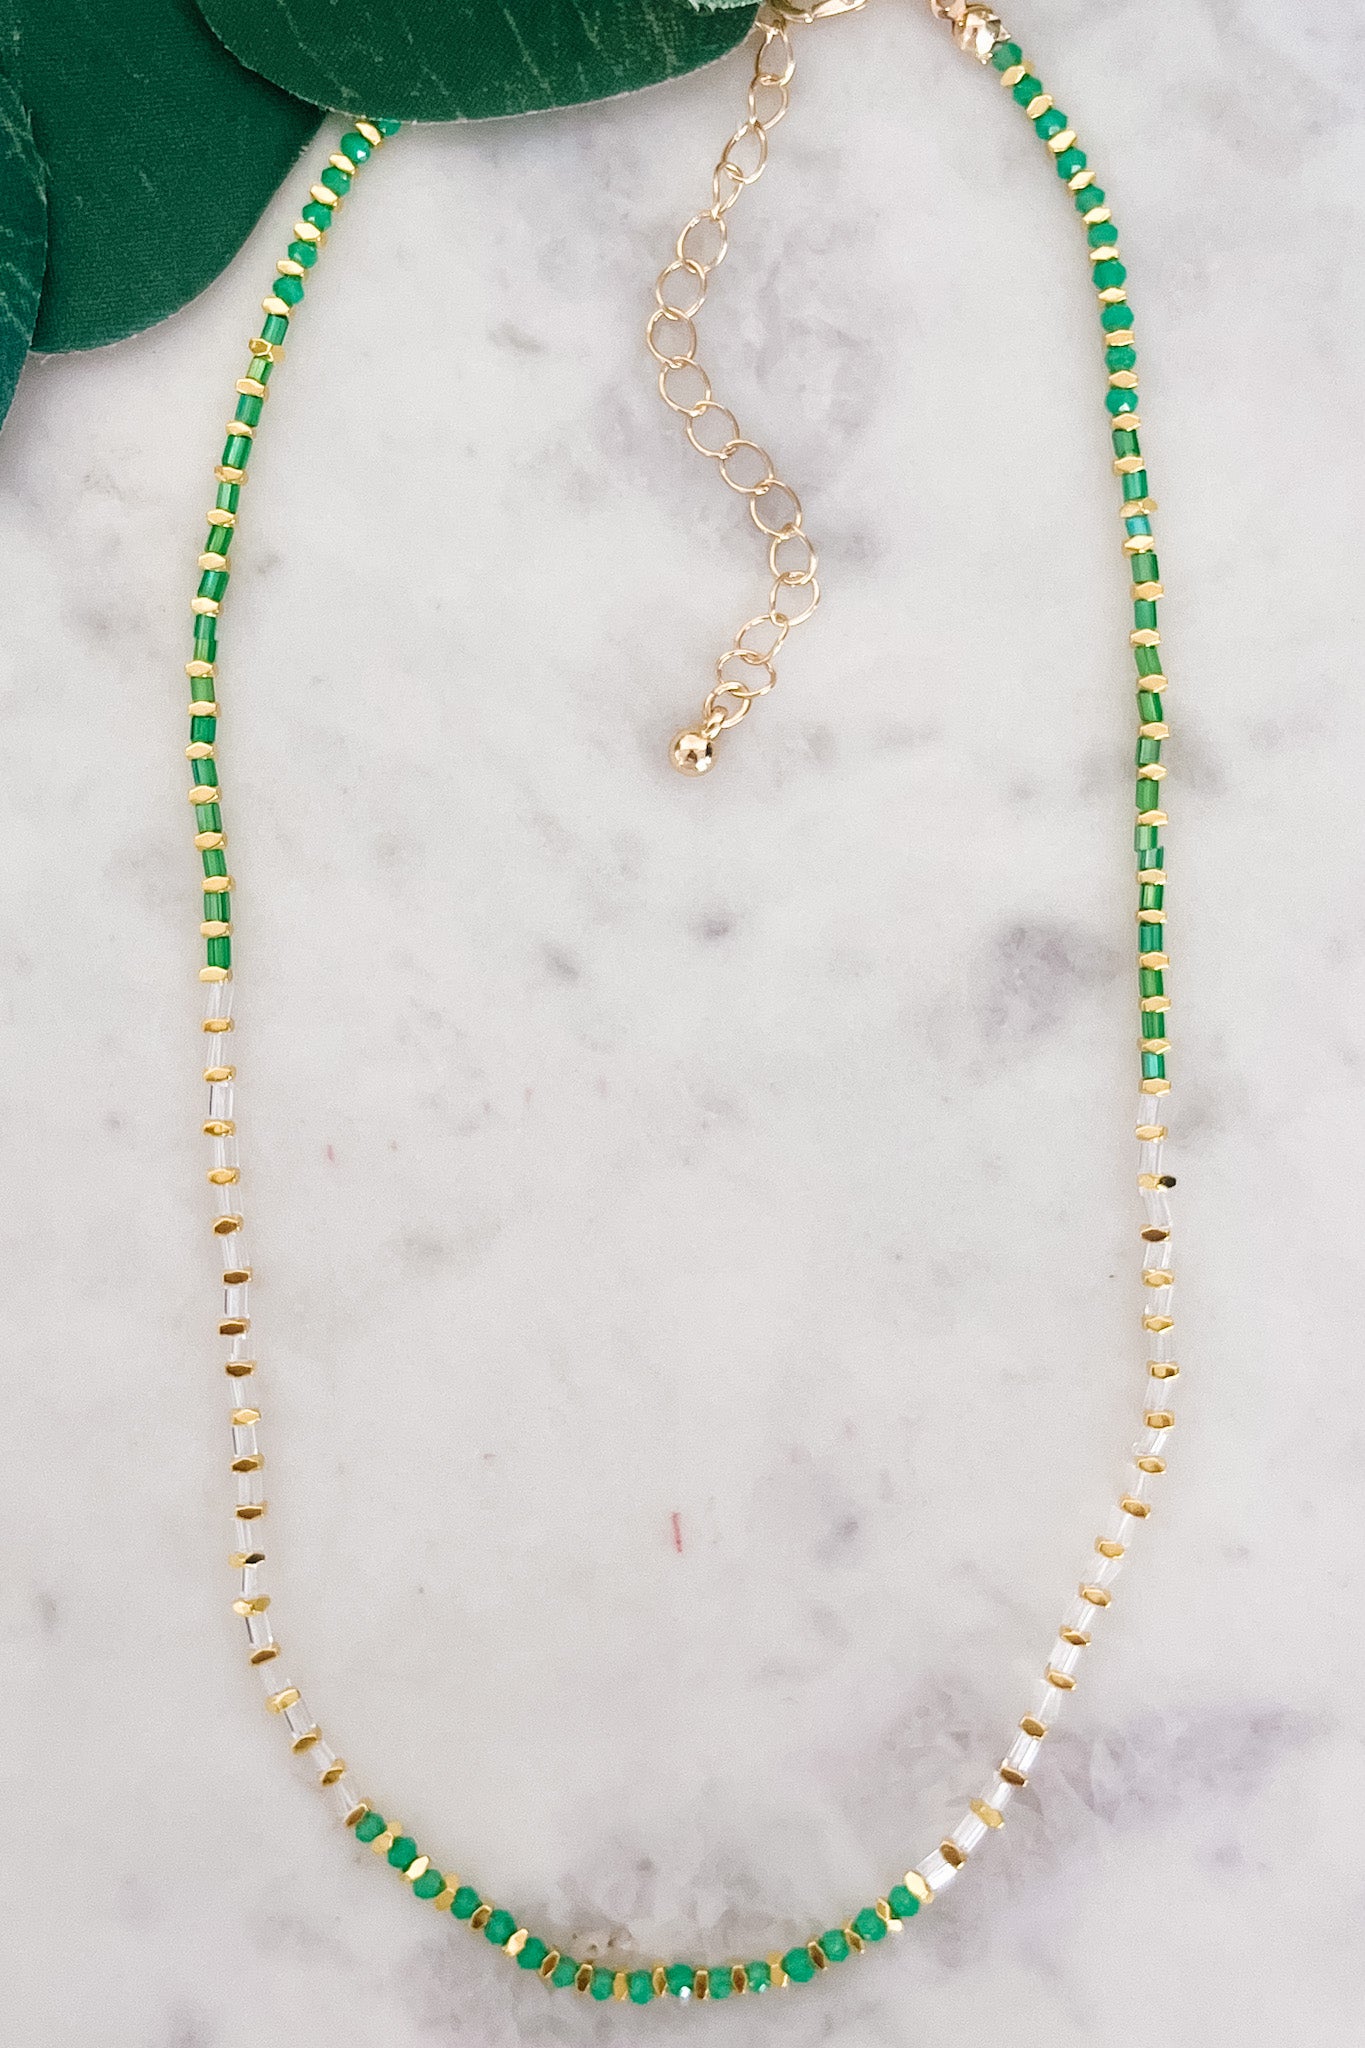 Beaded Gold Necklace with Colorful Beads